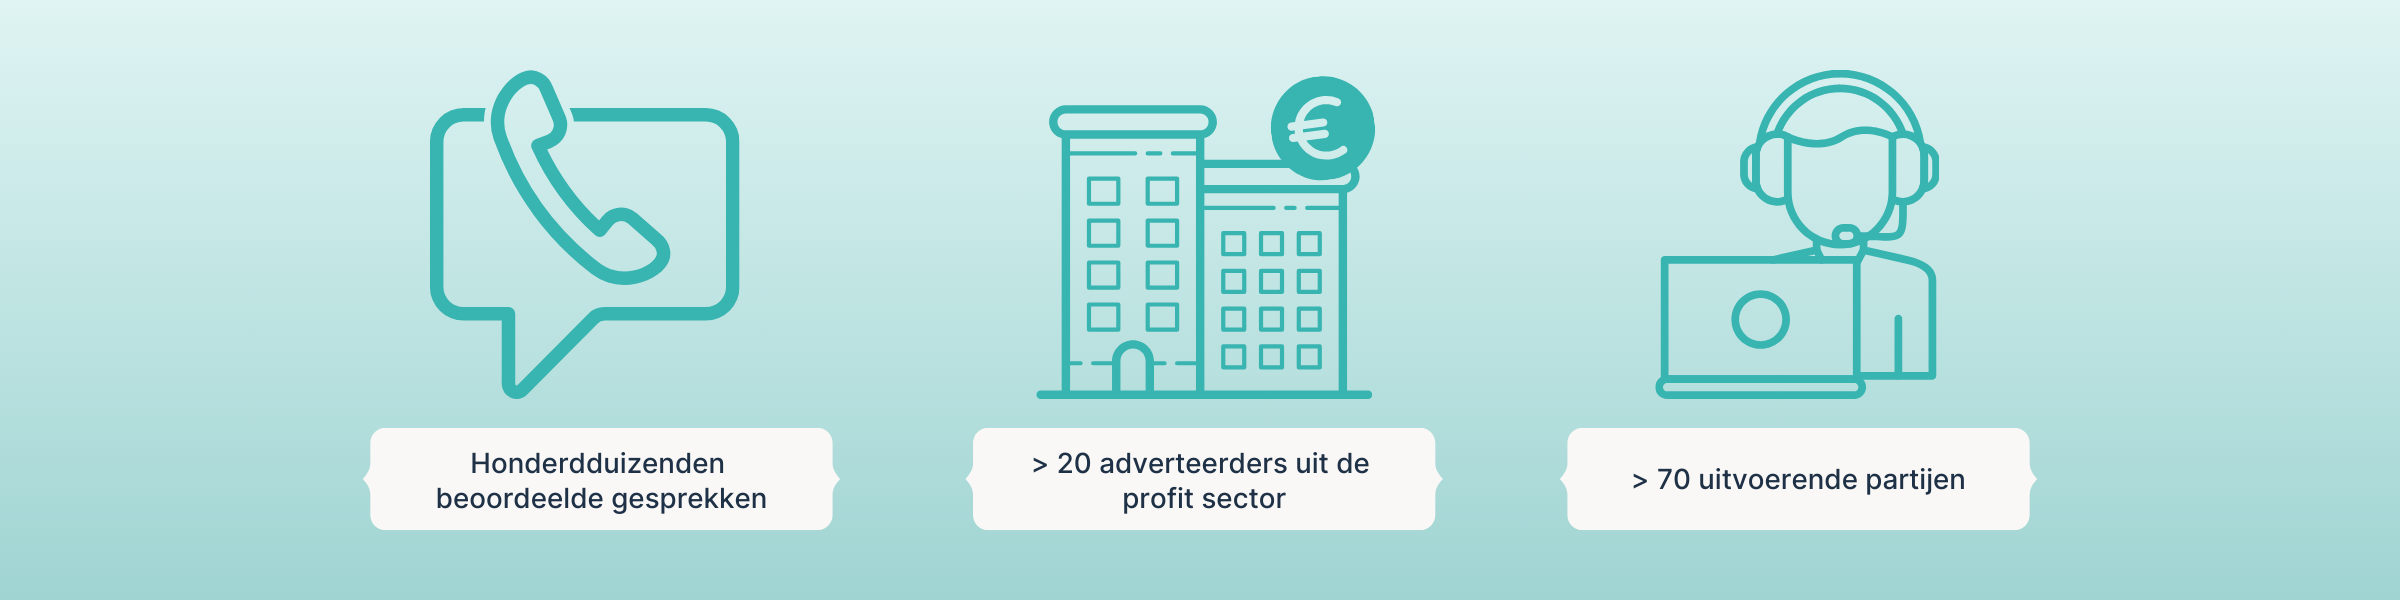 Nationale Compliance Benchmark Direct Marketing